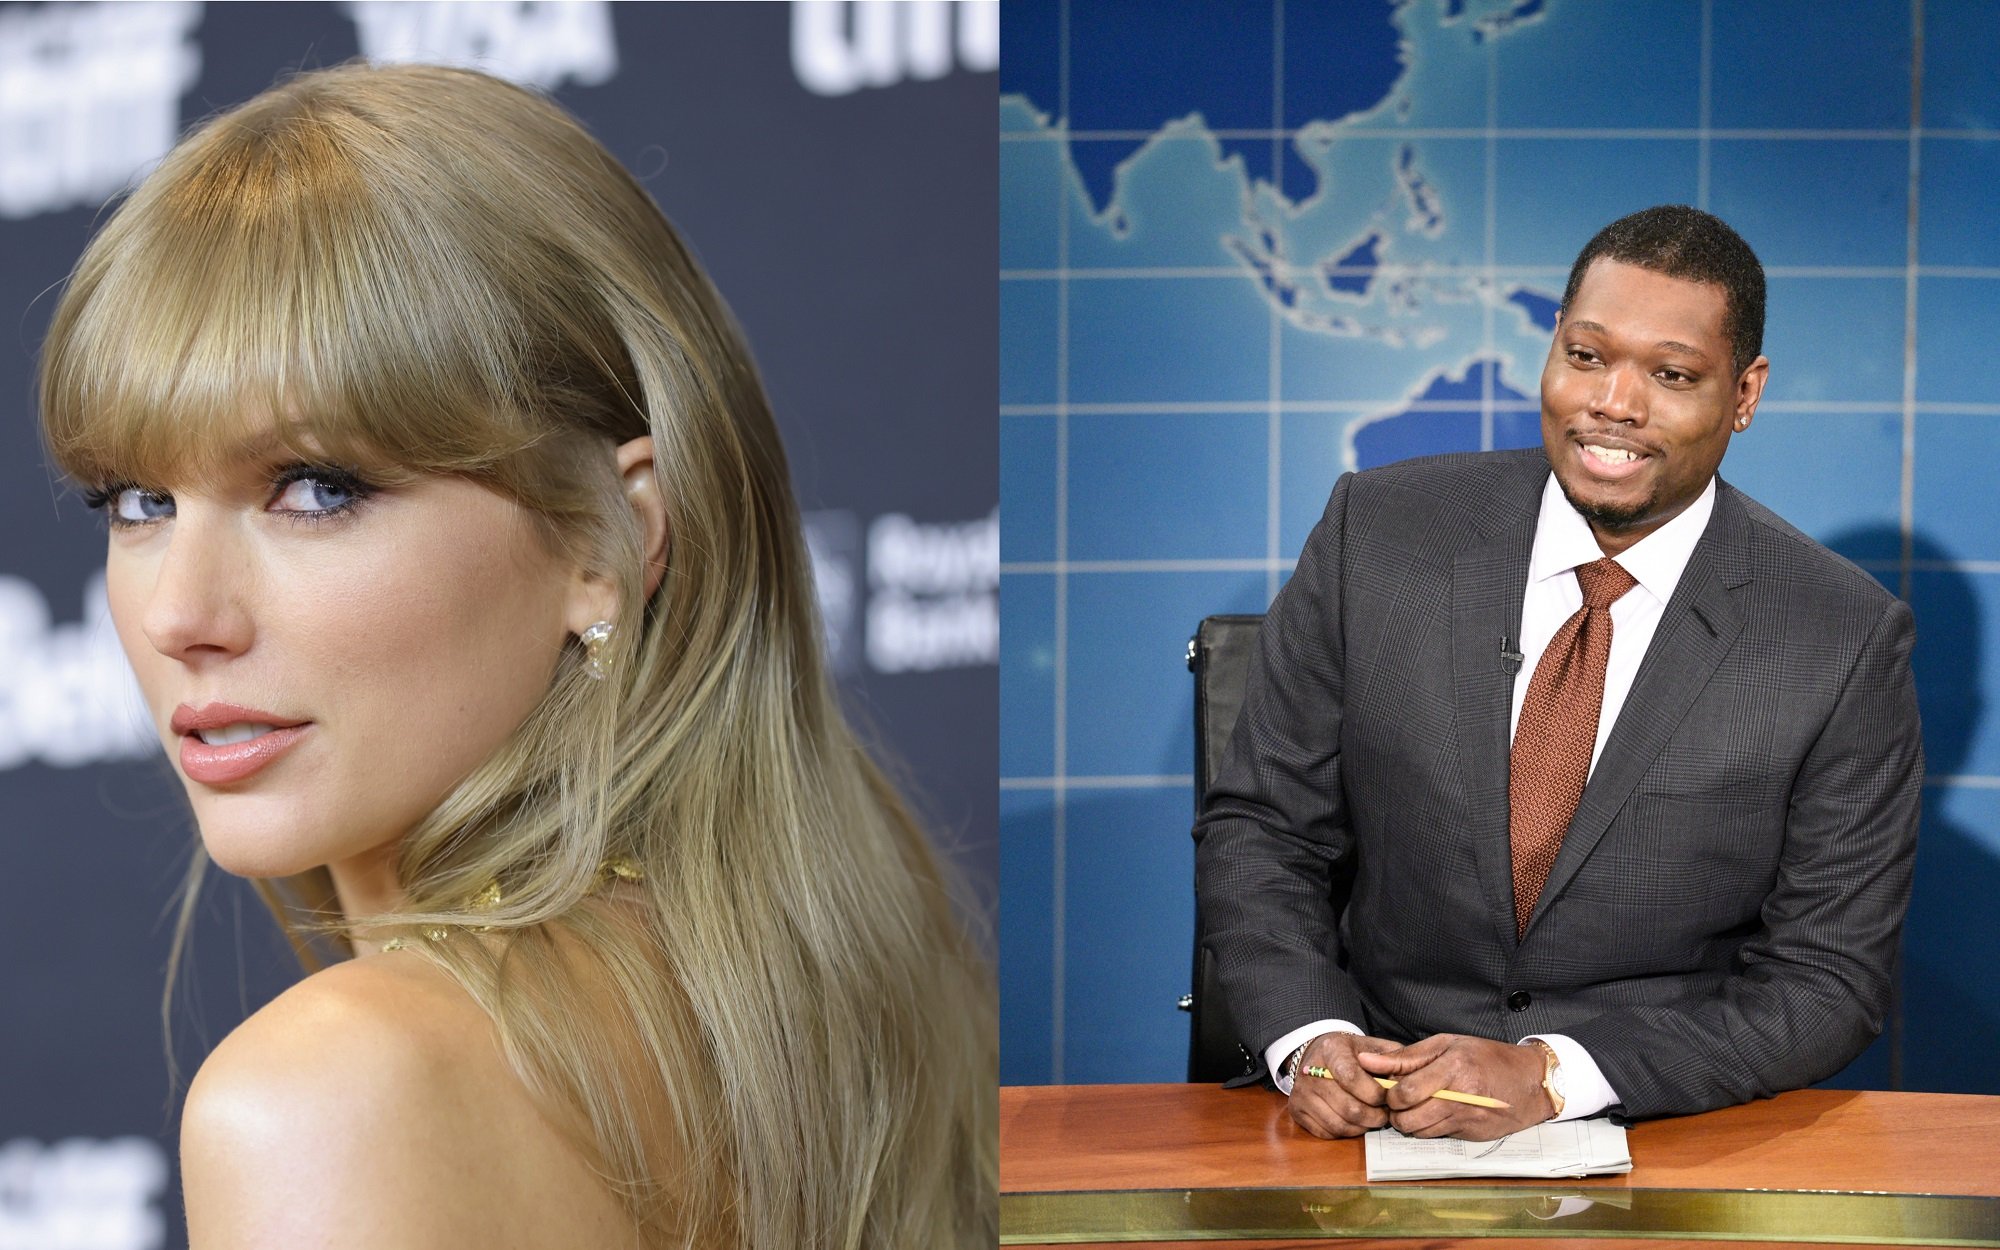 A joined photo of Taylor Swift and Michael Che